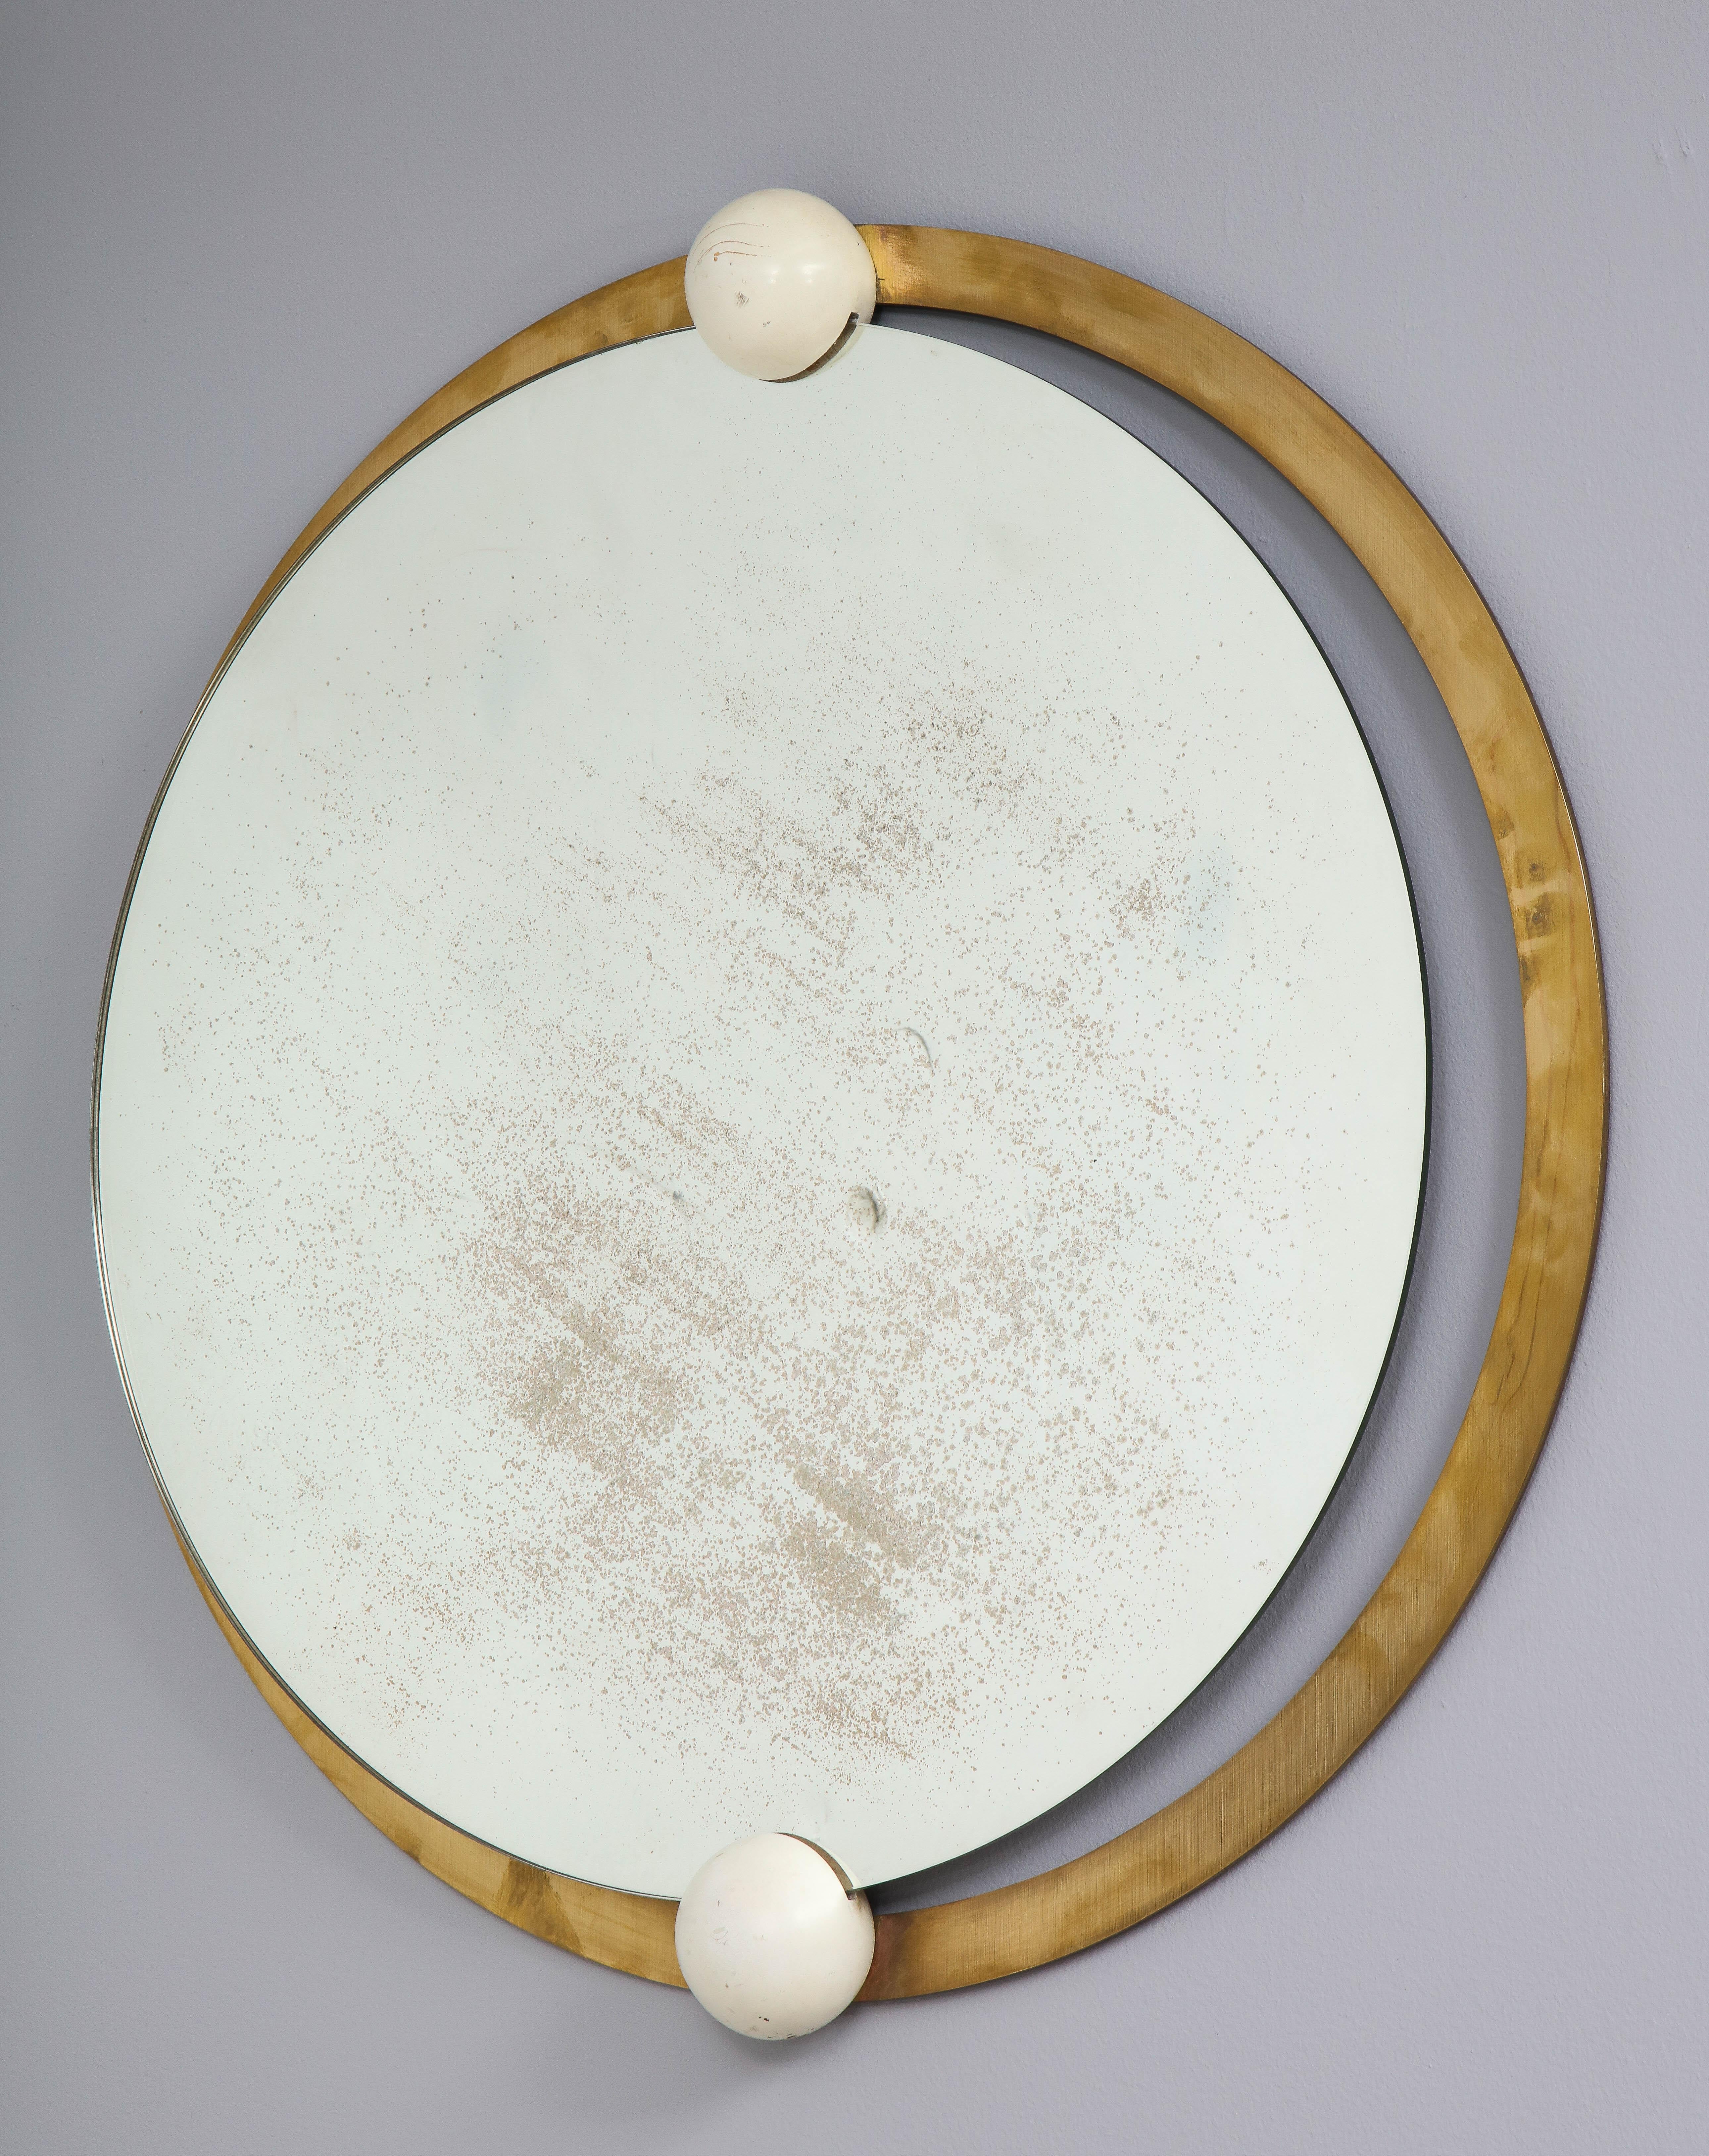 An Italian circular brass mirror with two painted white wood decorative balls, the glass aged.
Italy, circa 1960
Size: 26 1/4